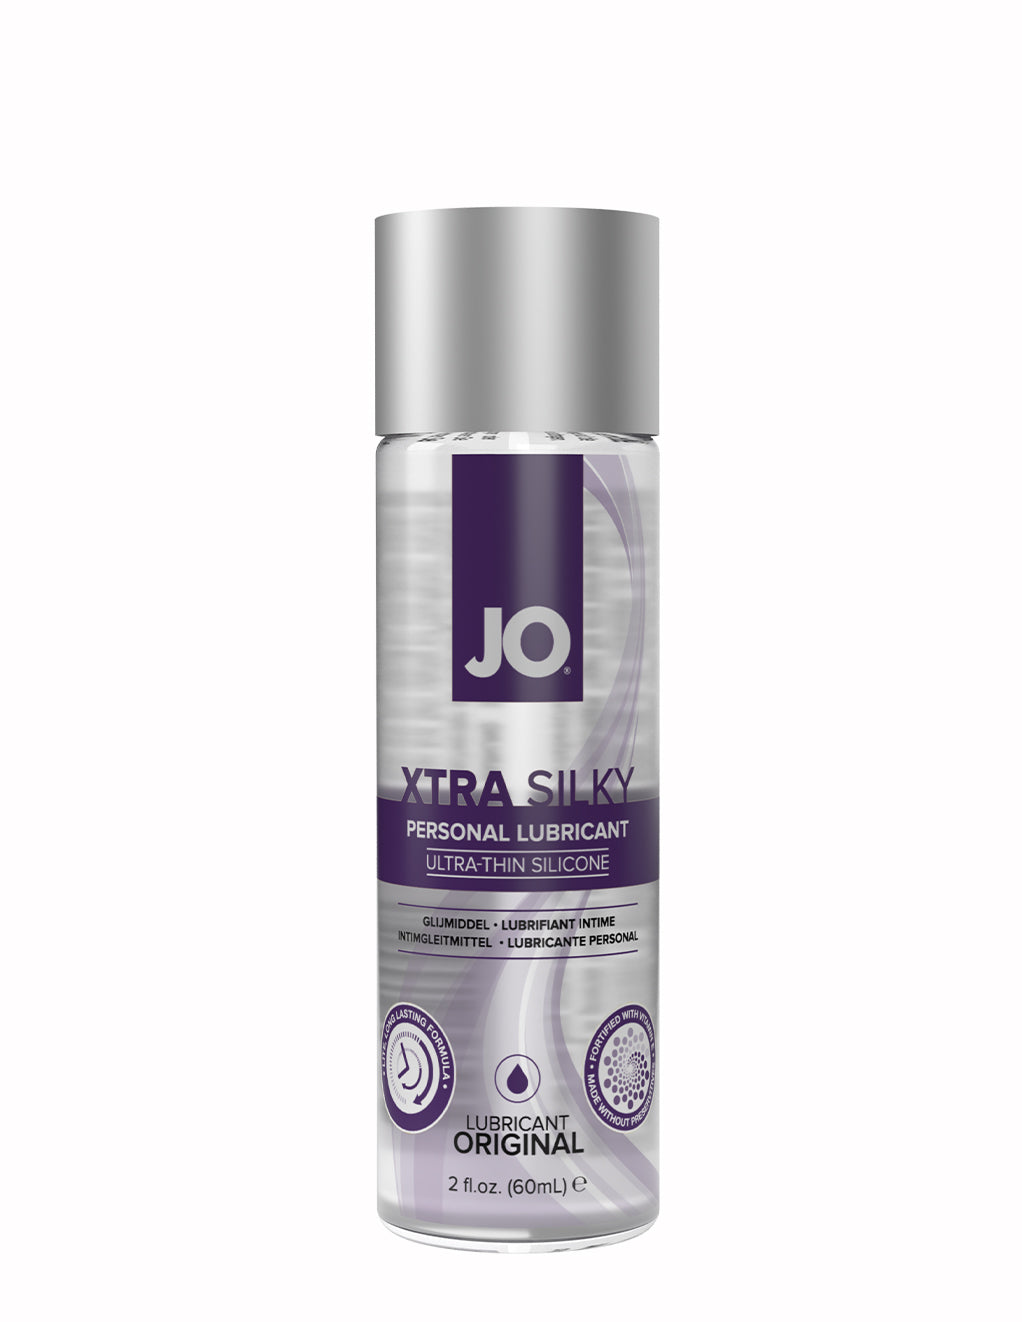 Jo Xtra Silky Silicone Lube- 2oz- Front